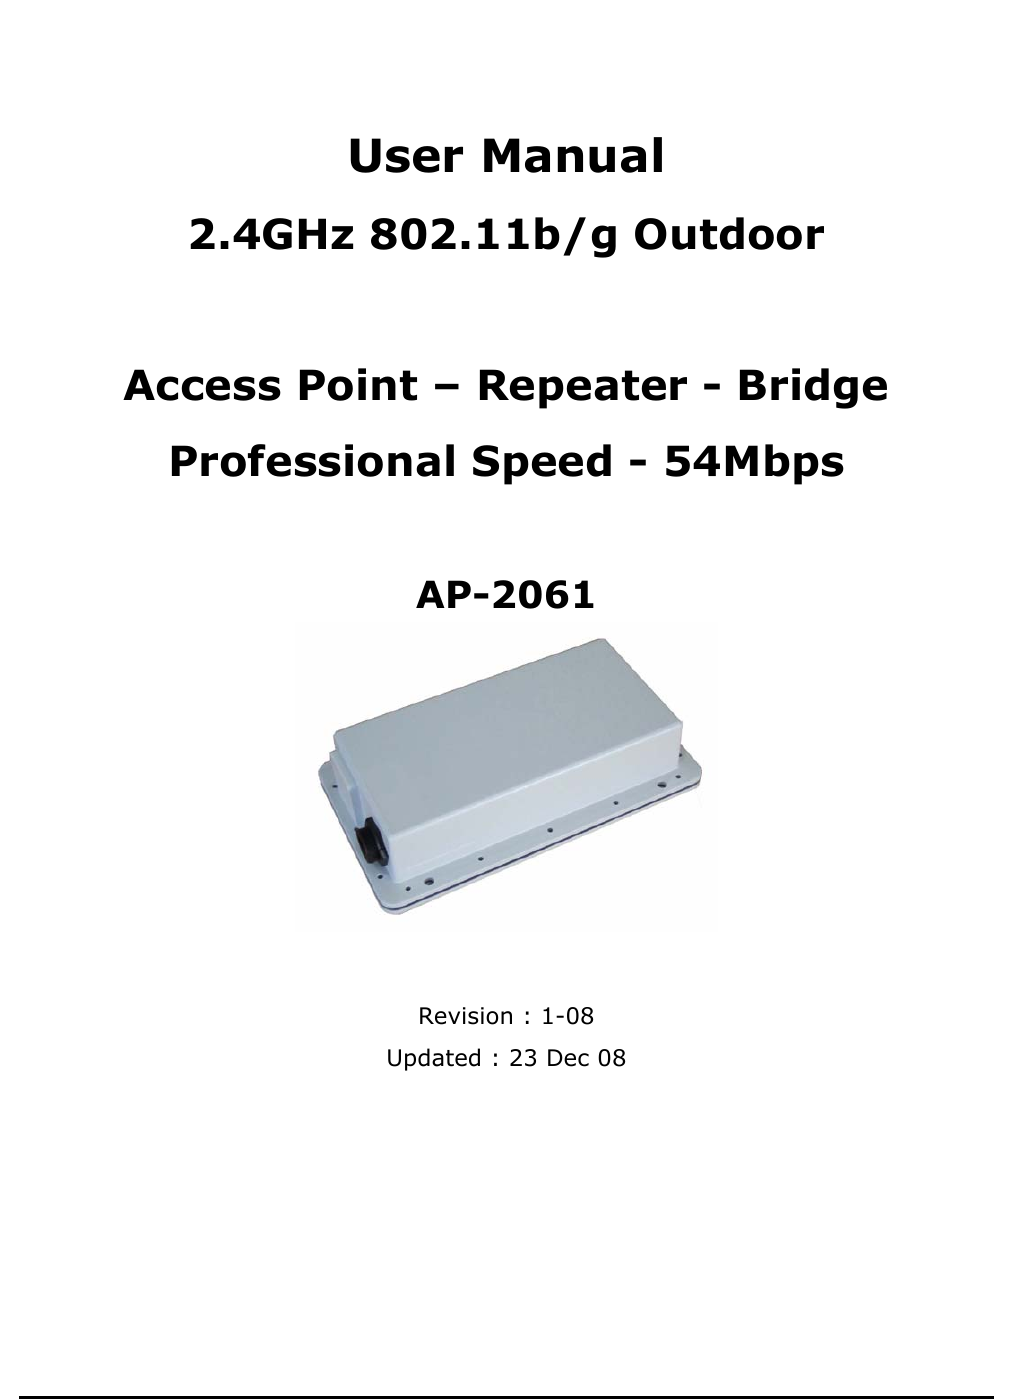           User Manual 2.4GHz 802.11b/g Outdoor    Access Point – Repeater - Bridge  Professional Speed - 54Mbps   AP-2061   Revision : 1-08 Updated : 23 Dec 08        